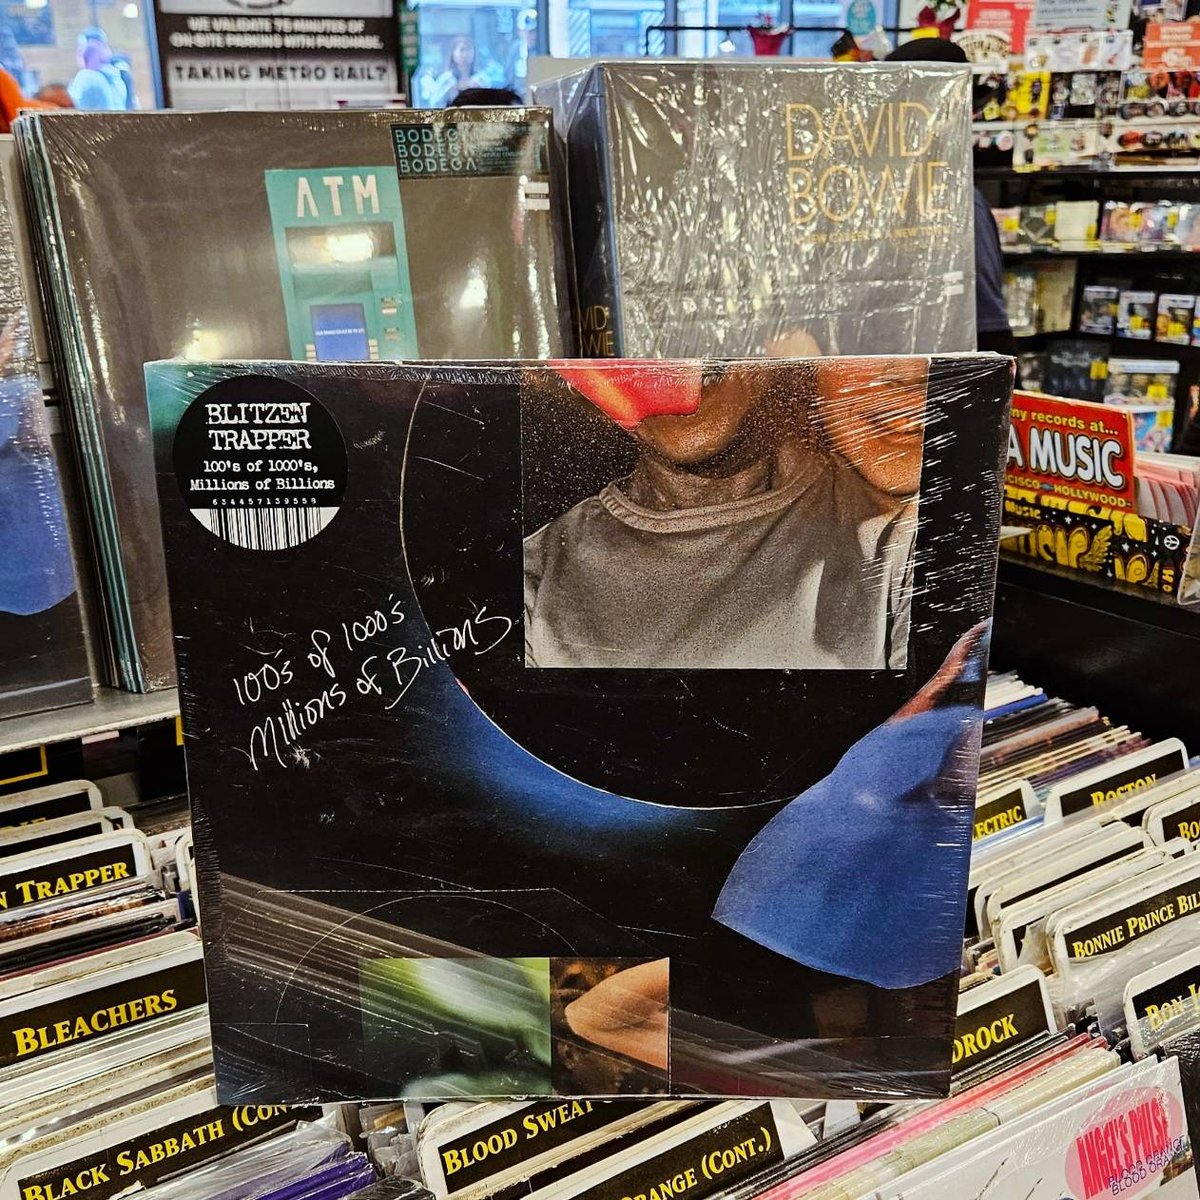 .@BlitzenTrapper's new album '100's of 1000's, Millions of Billions' is out now on CD & vinyl via @yeproc. Named after a phrase from Buddhist Mahayana sutras, the melodies are warm, inviting '70s rock meets indie, with a dash of psychedelia. Get it here: bit.ly/3hBuIg0